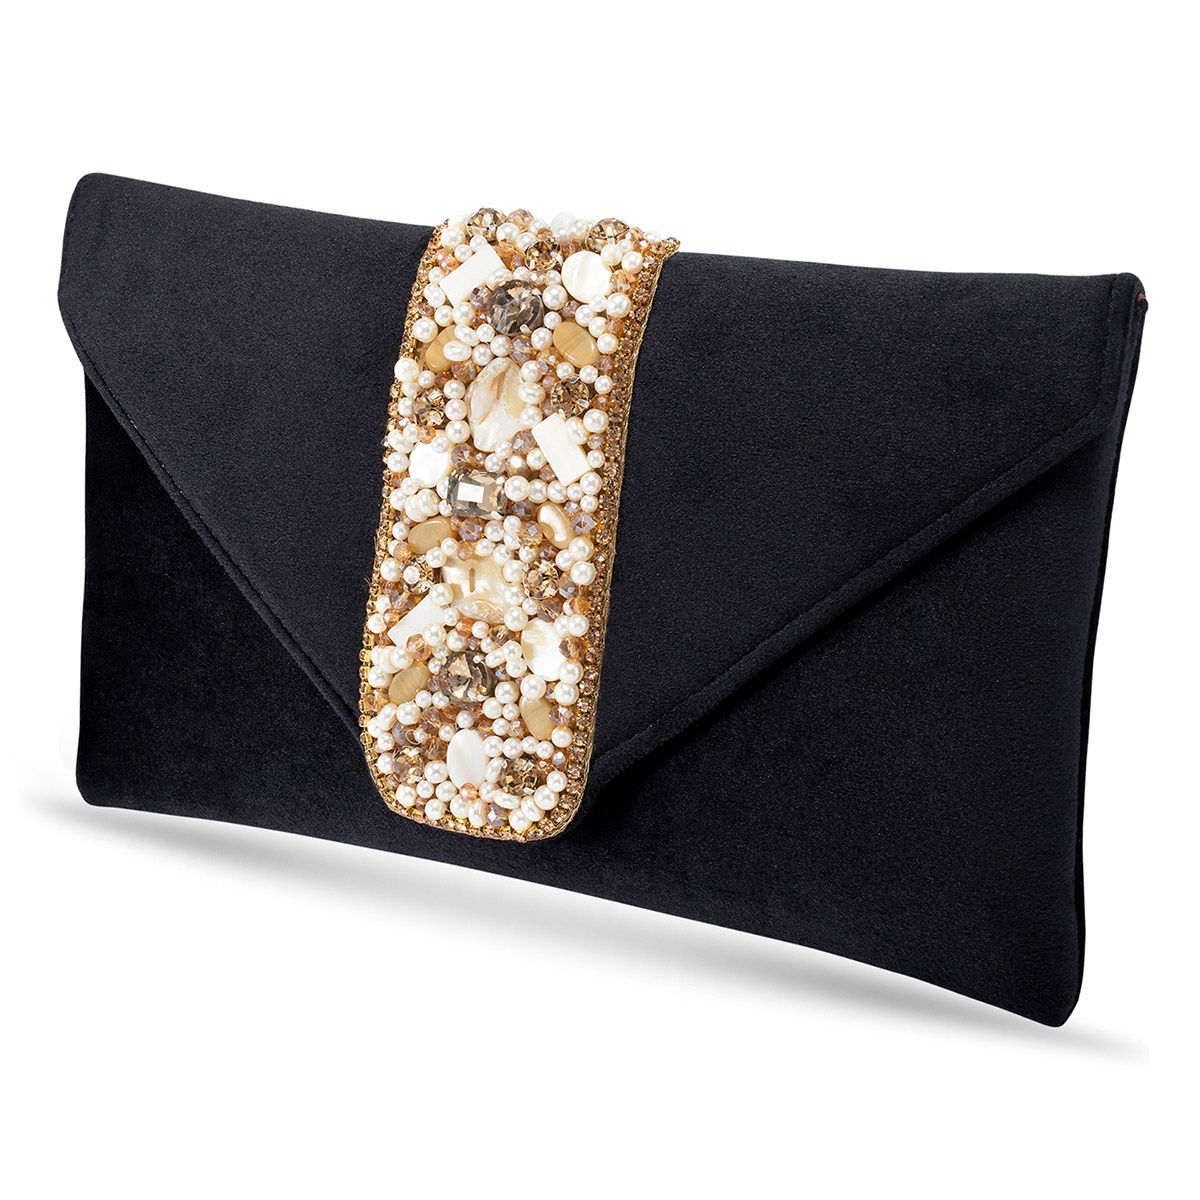 Lori Weitzner Athena Clutch Bag for Women made with small black beads